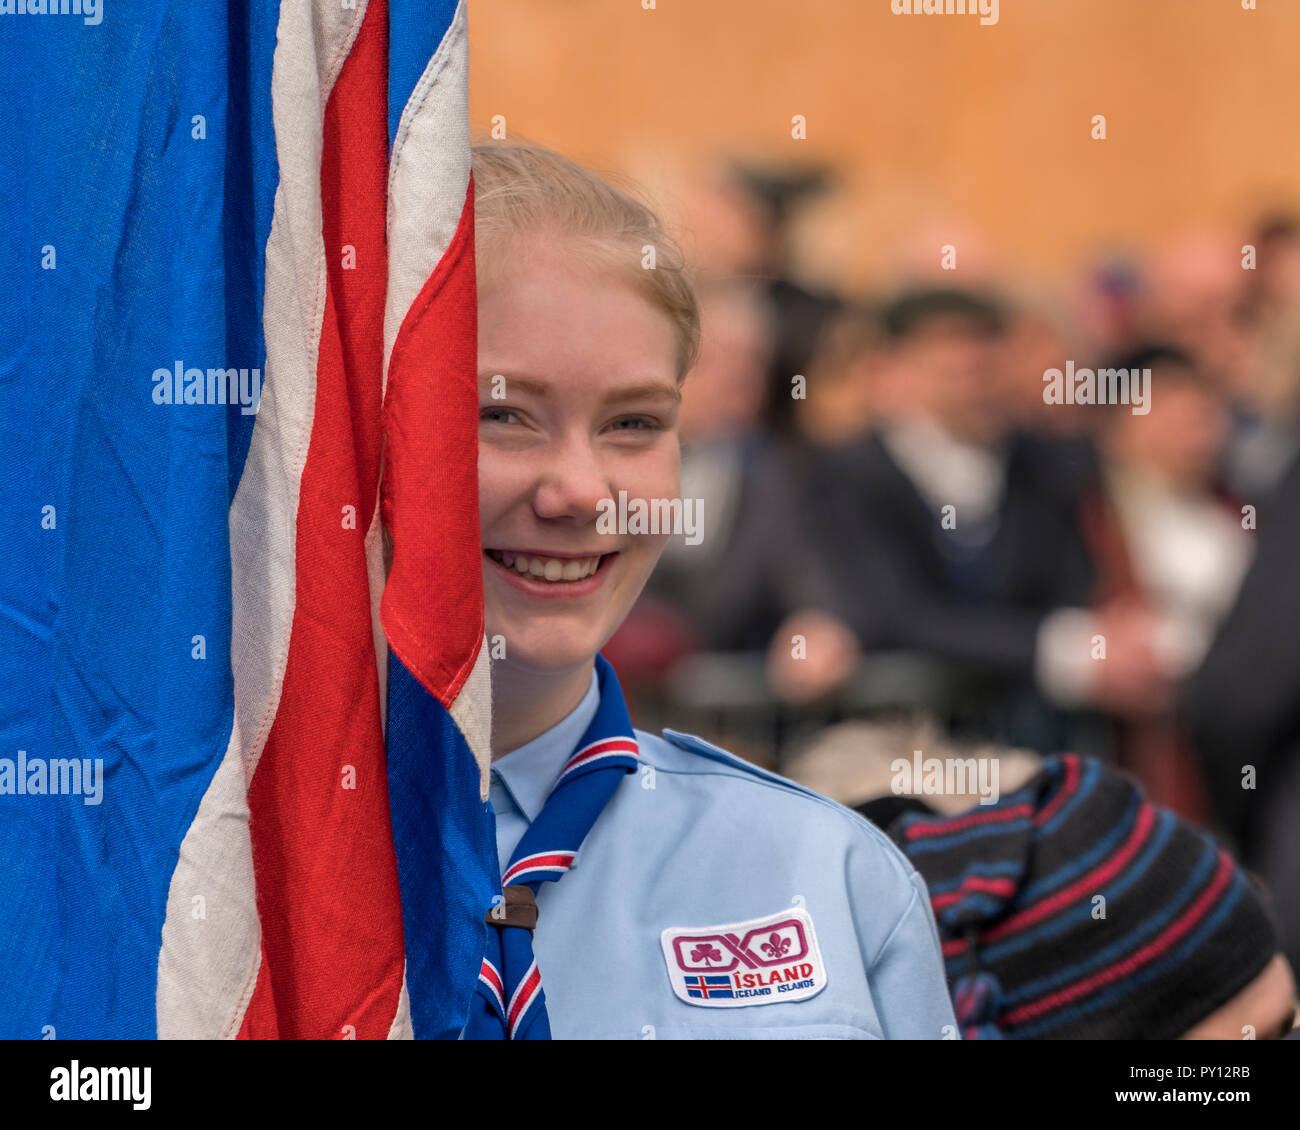 Iceland's Scout taking part in the festivities of Independence day, June 17, Reykjavik, Iceland Stock Photo